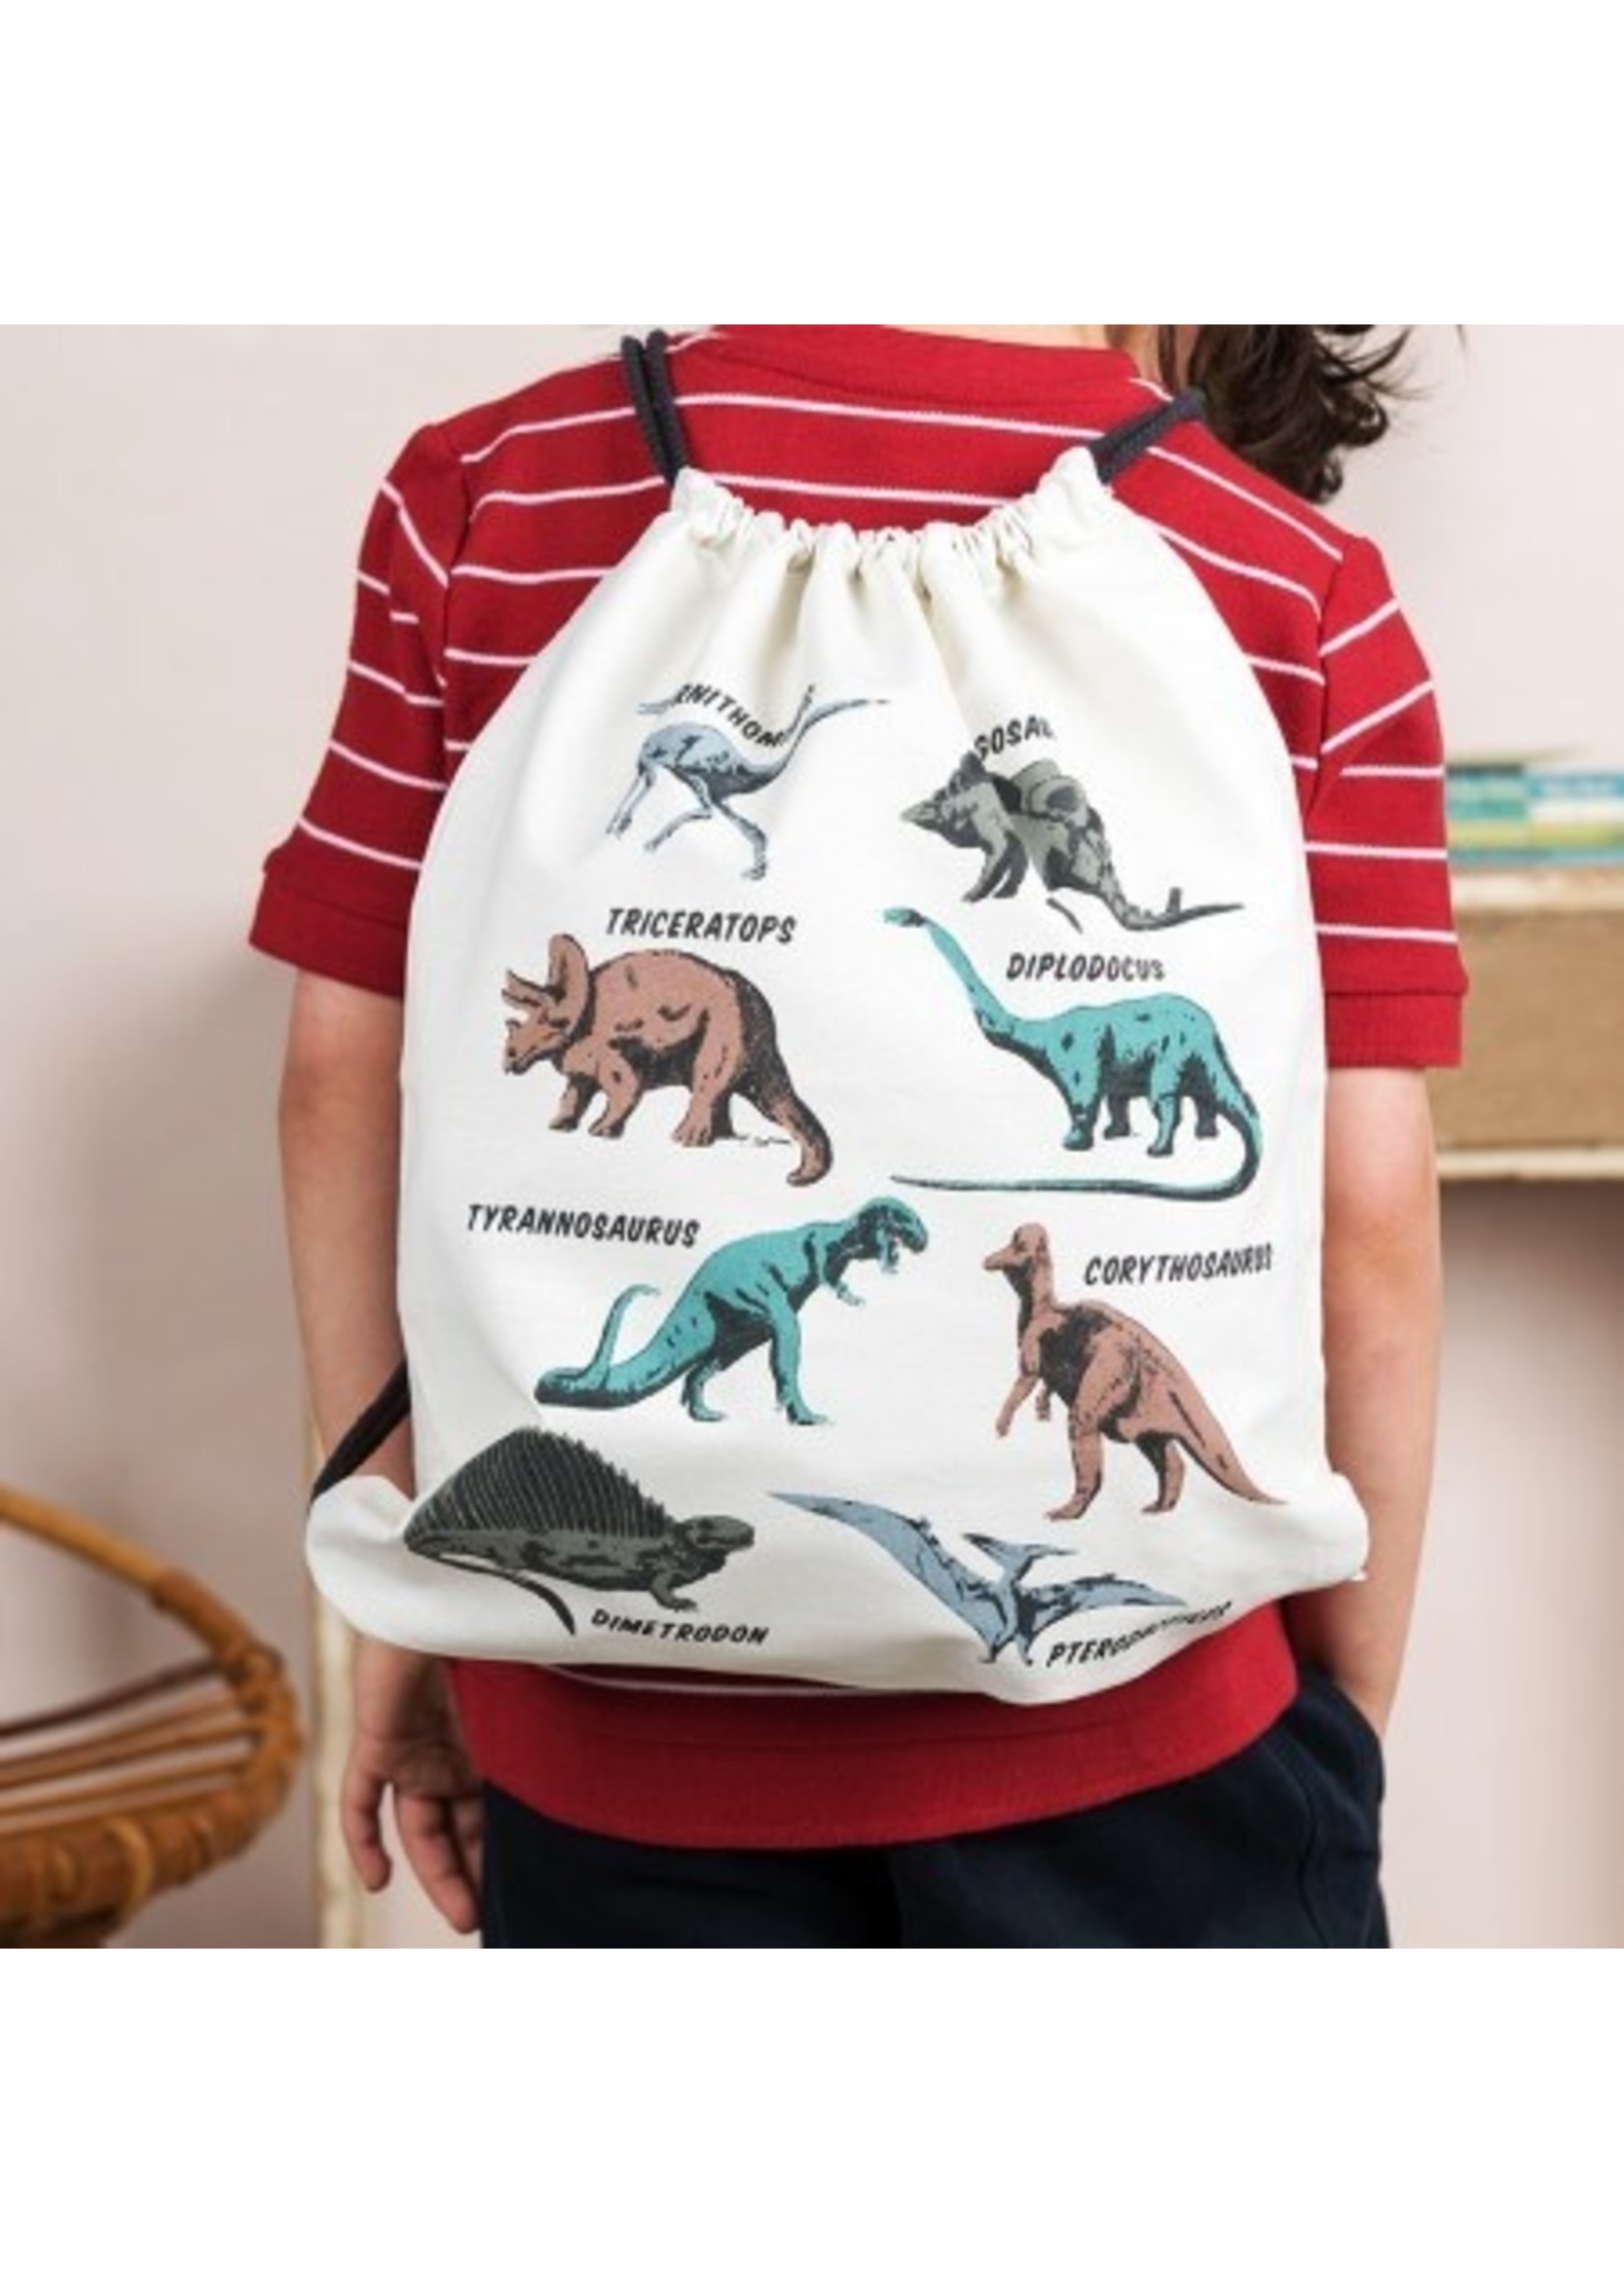 Rex London Gymbag with dinosaurs